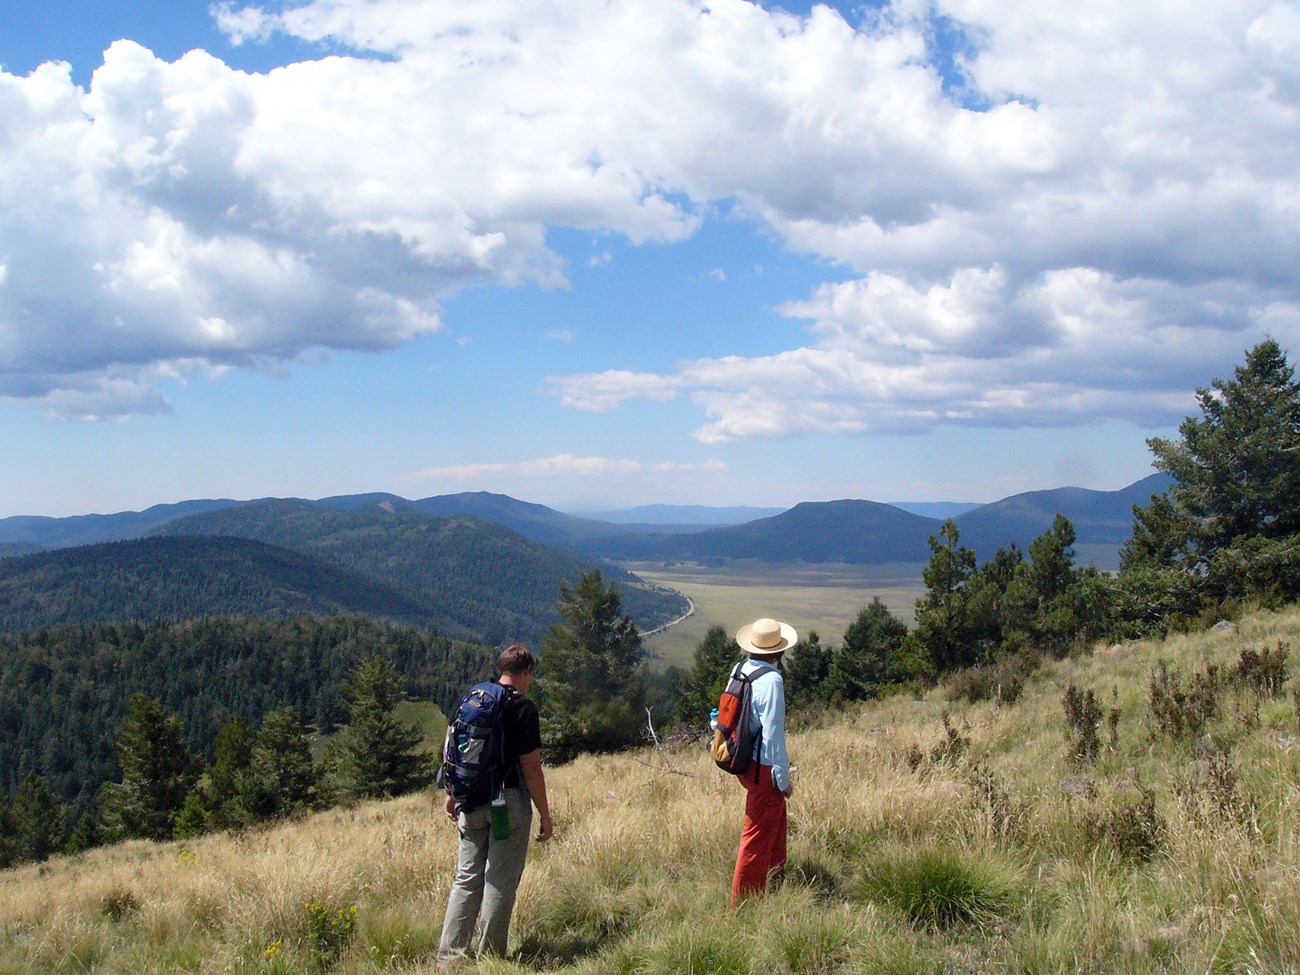 hikers on hill slope with valley and hills in background